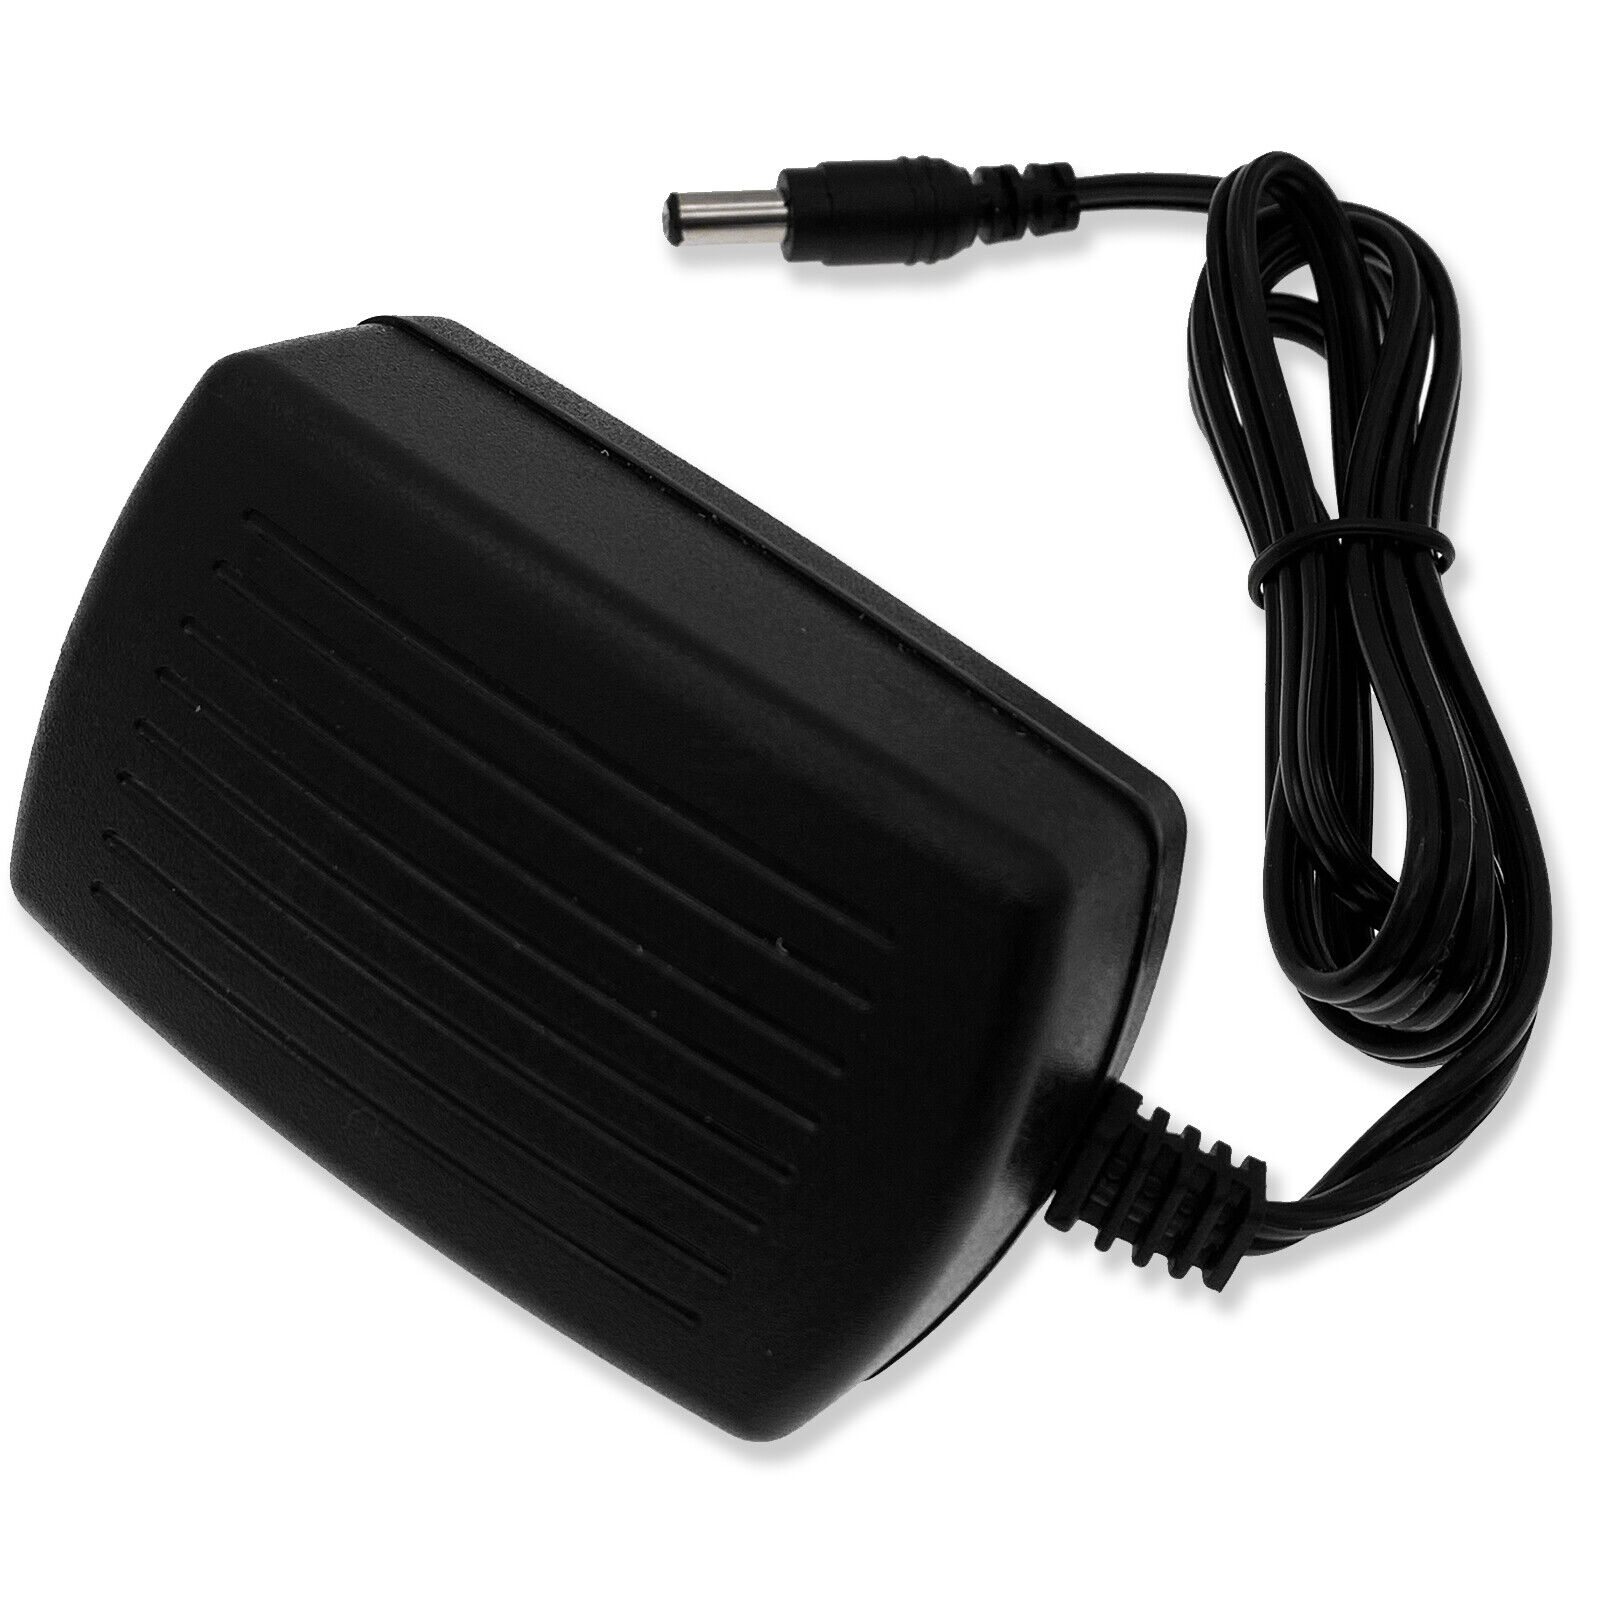 27V Charging Power Supply Charger Adapter for AirRam K9 Multi Mk2 Vacuum Cleaner Brand Unbranded Compatible Brand f